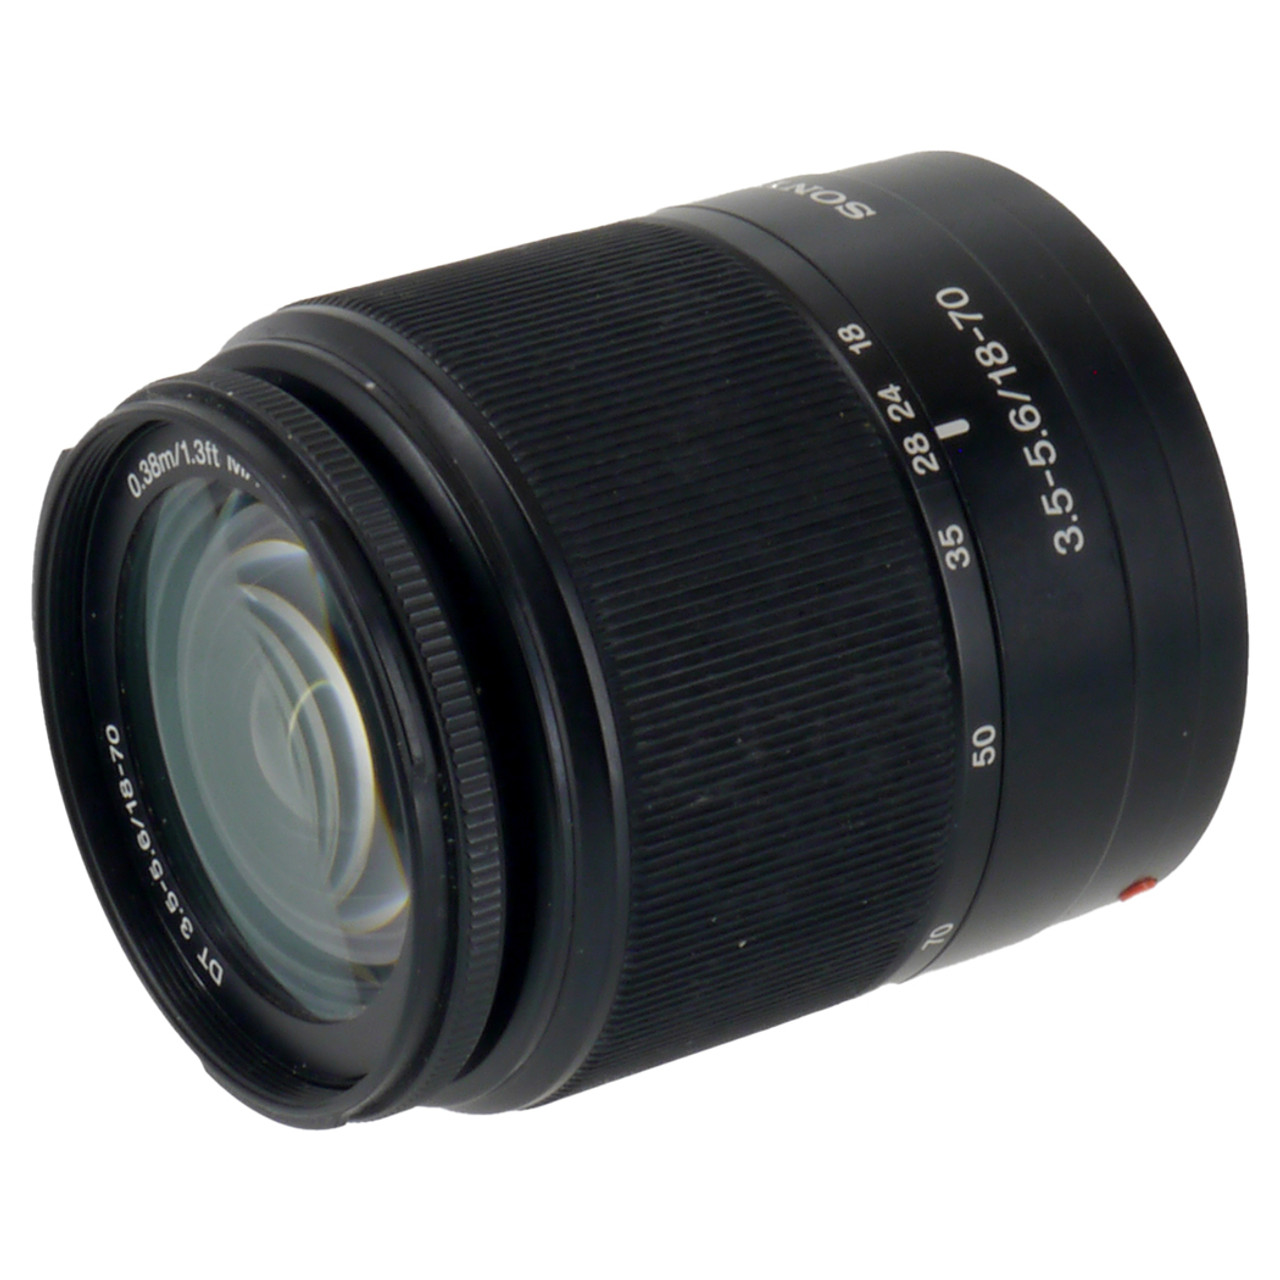 USED SONY A DT 18-70MM F3.5-5.6